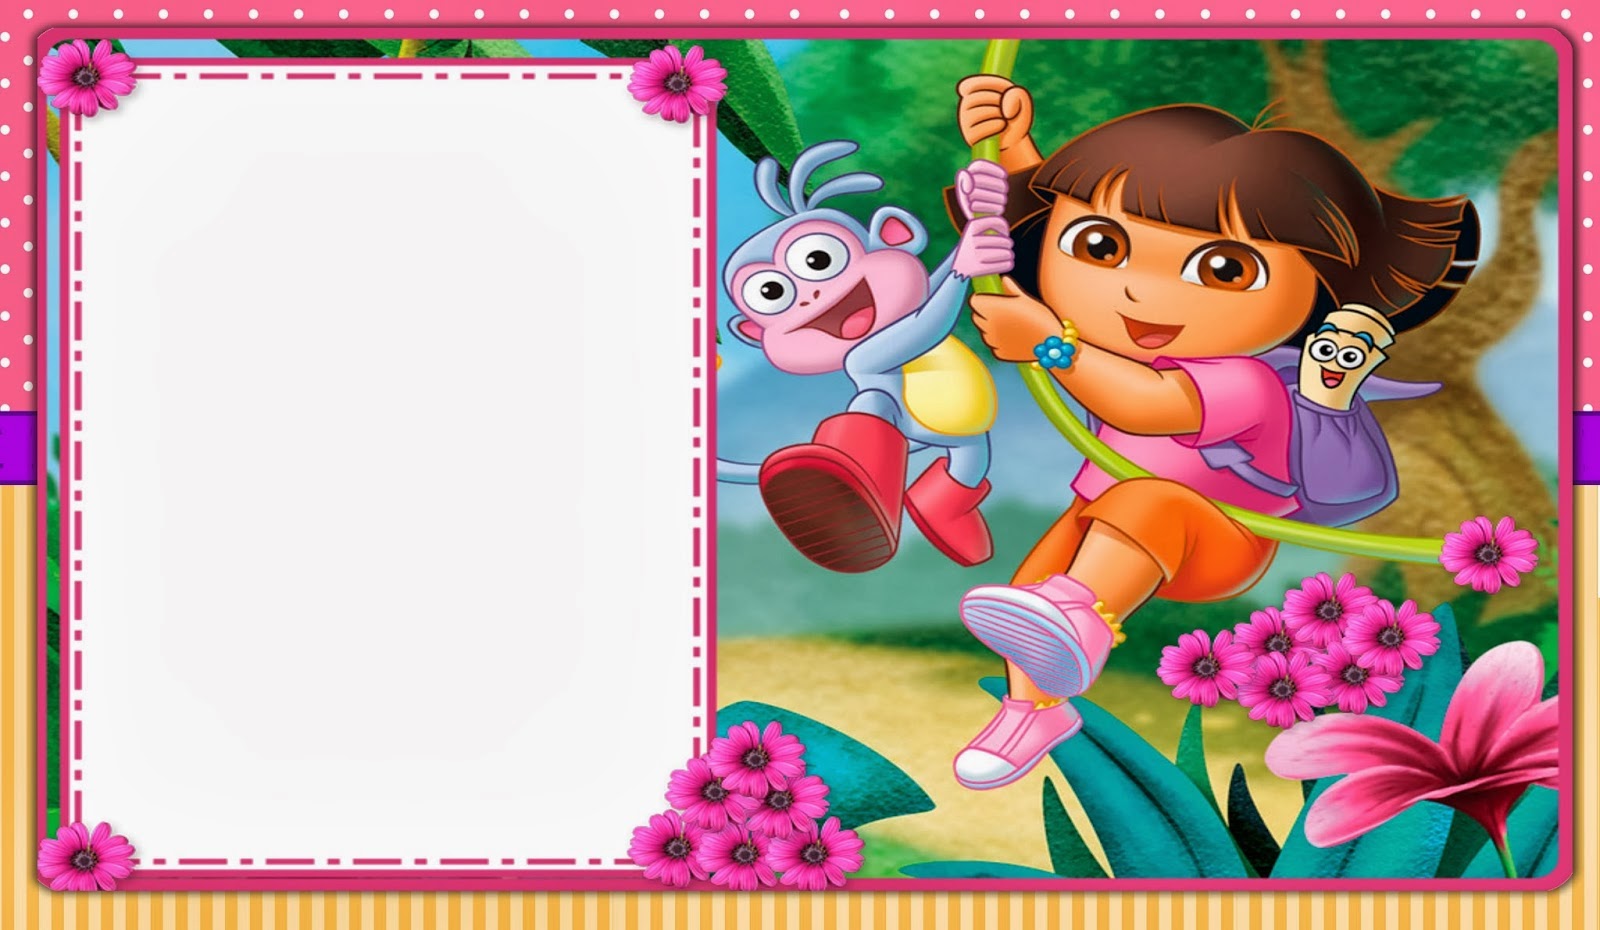 dora-the-explorer-free-printable-invitations-boxes-and-party